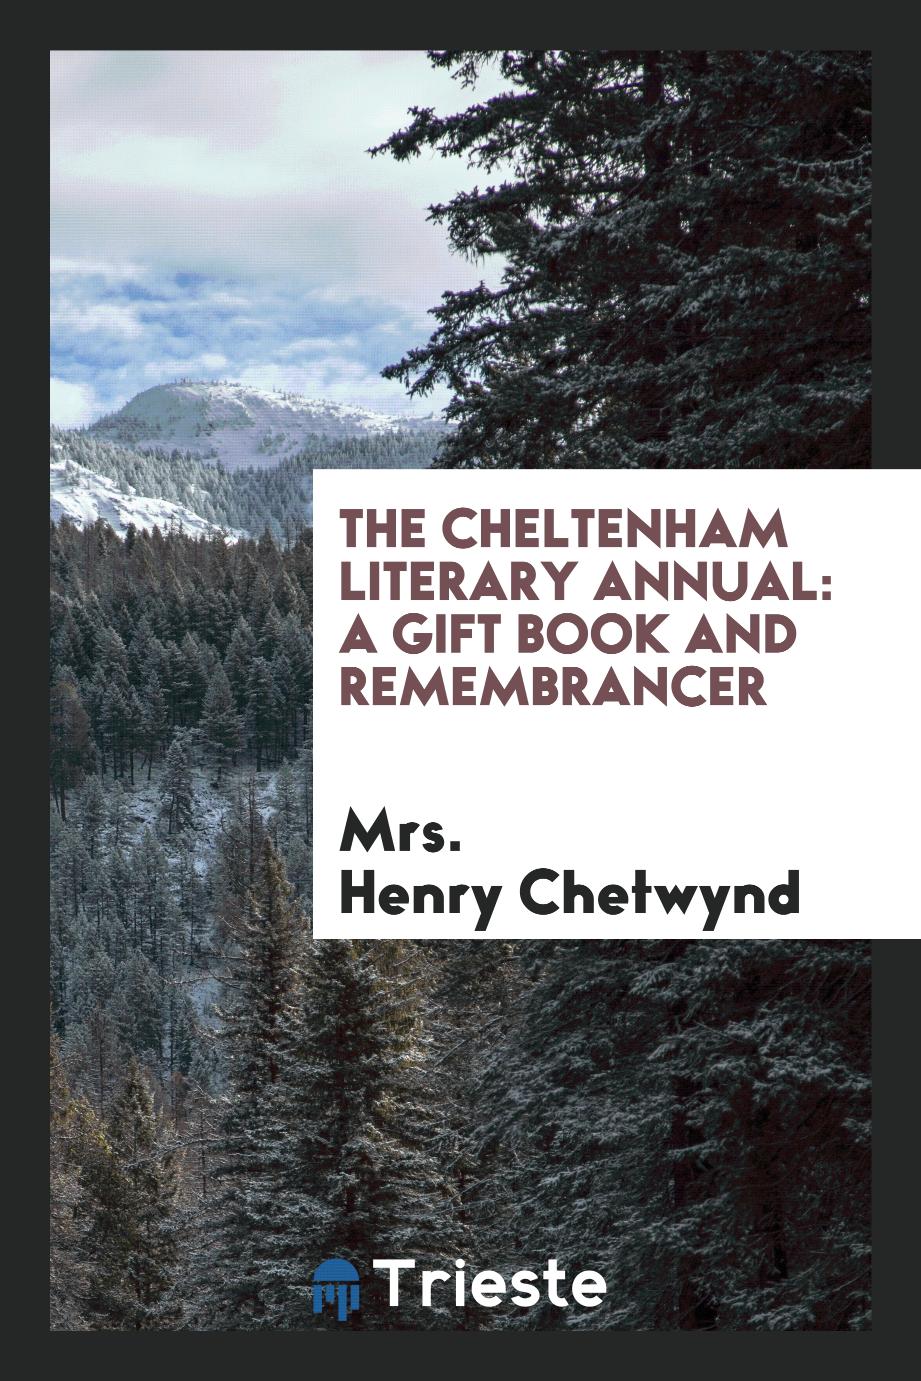 The Cheltenham Literary Annual: A Gift Book and Remembrancer